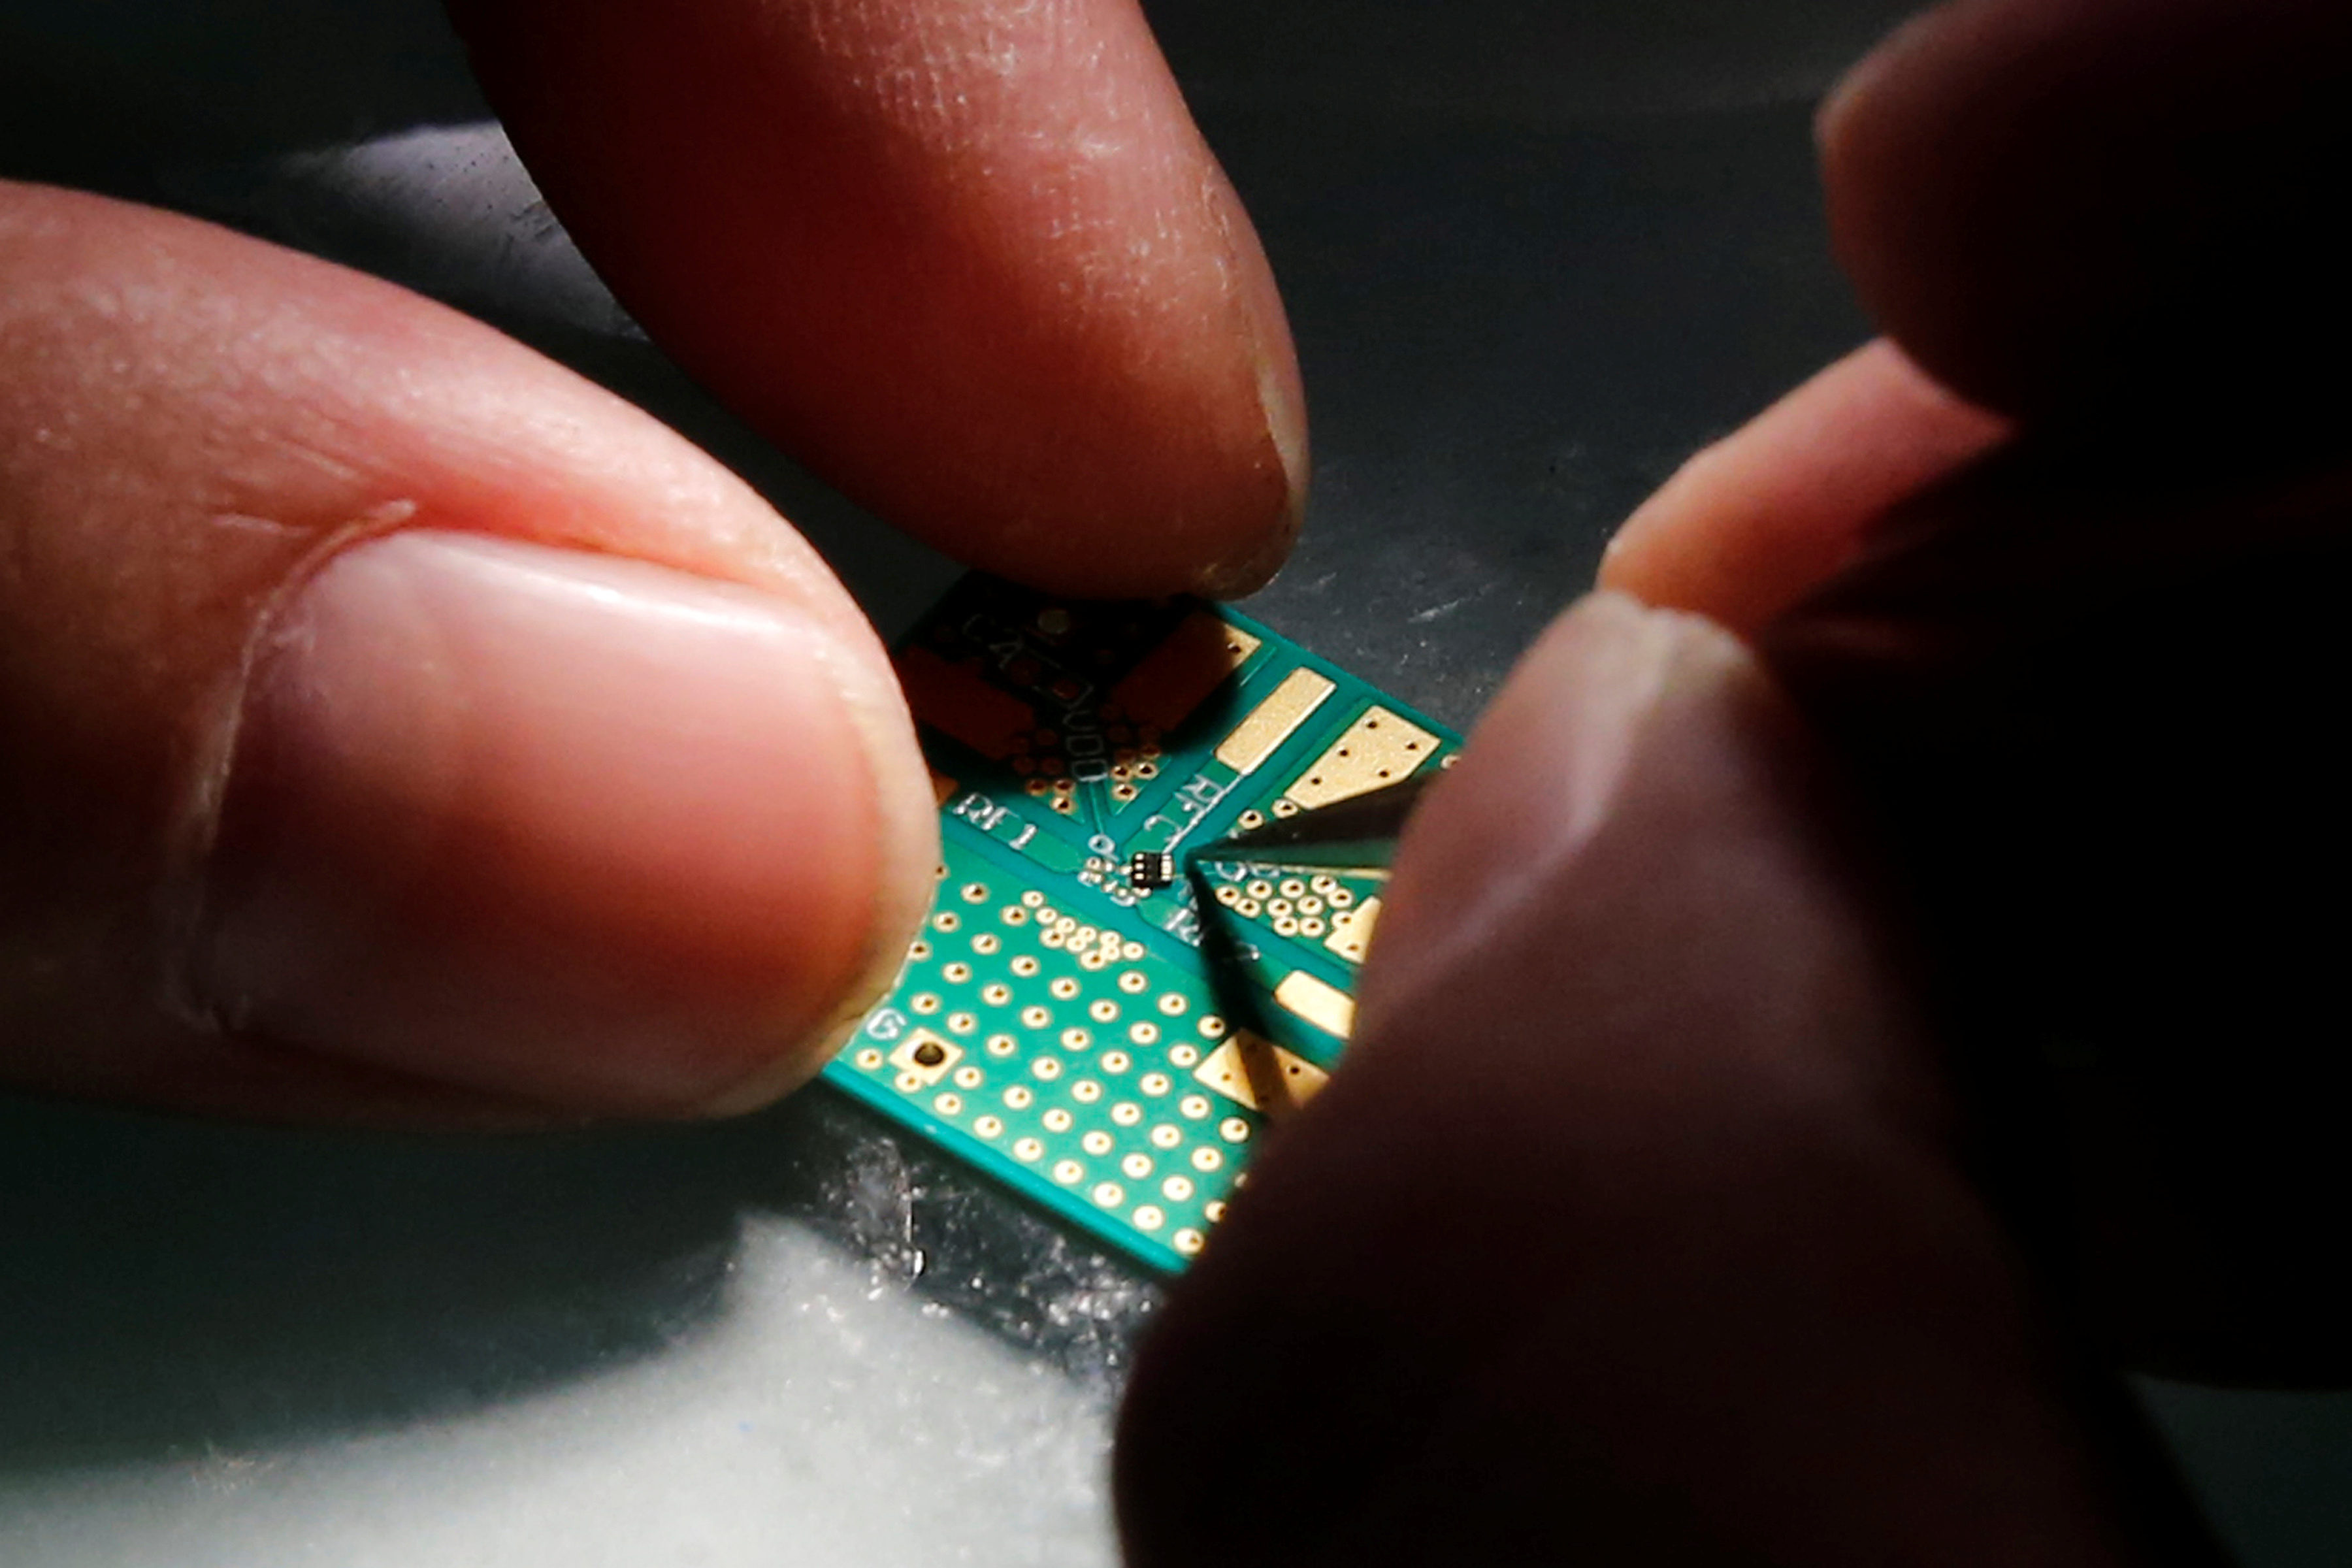 A researcher plants a semiconductor on an interface board during a research work to design and develop a semiconductor product at Tsinghua Unigroup research centre in Beijing